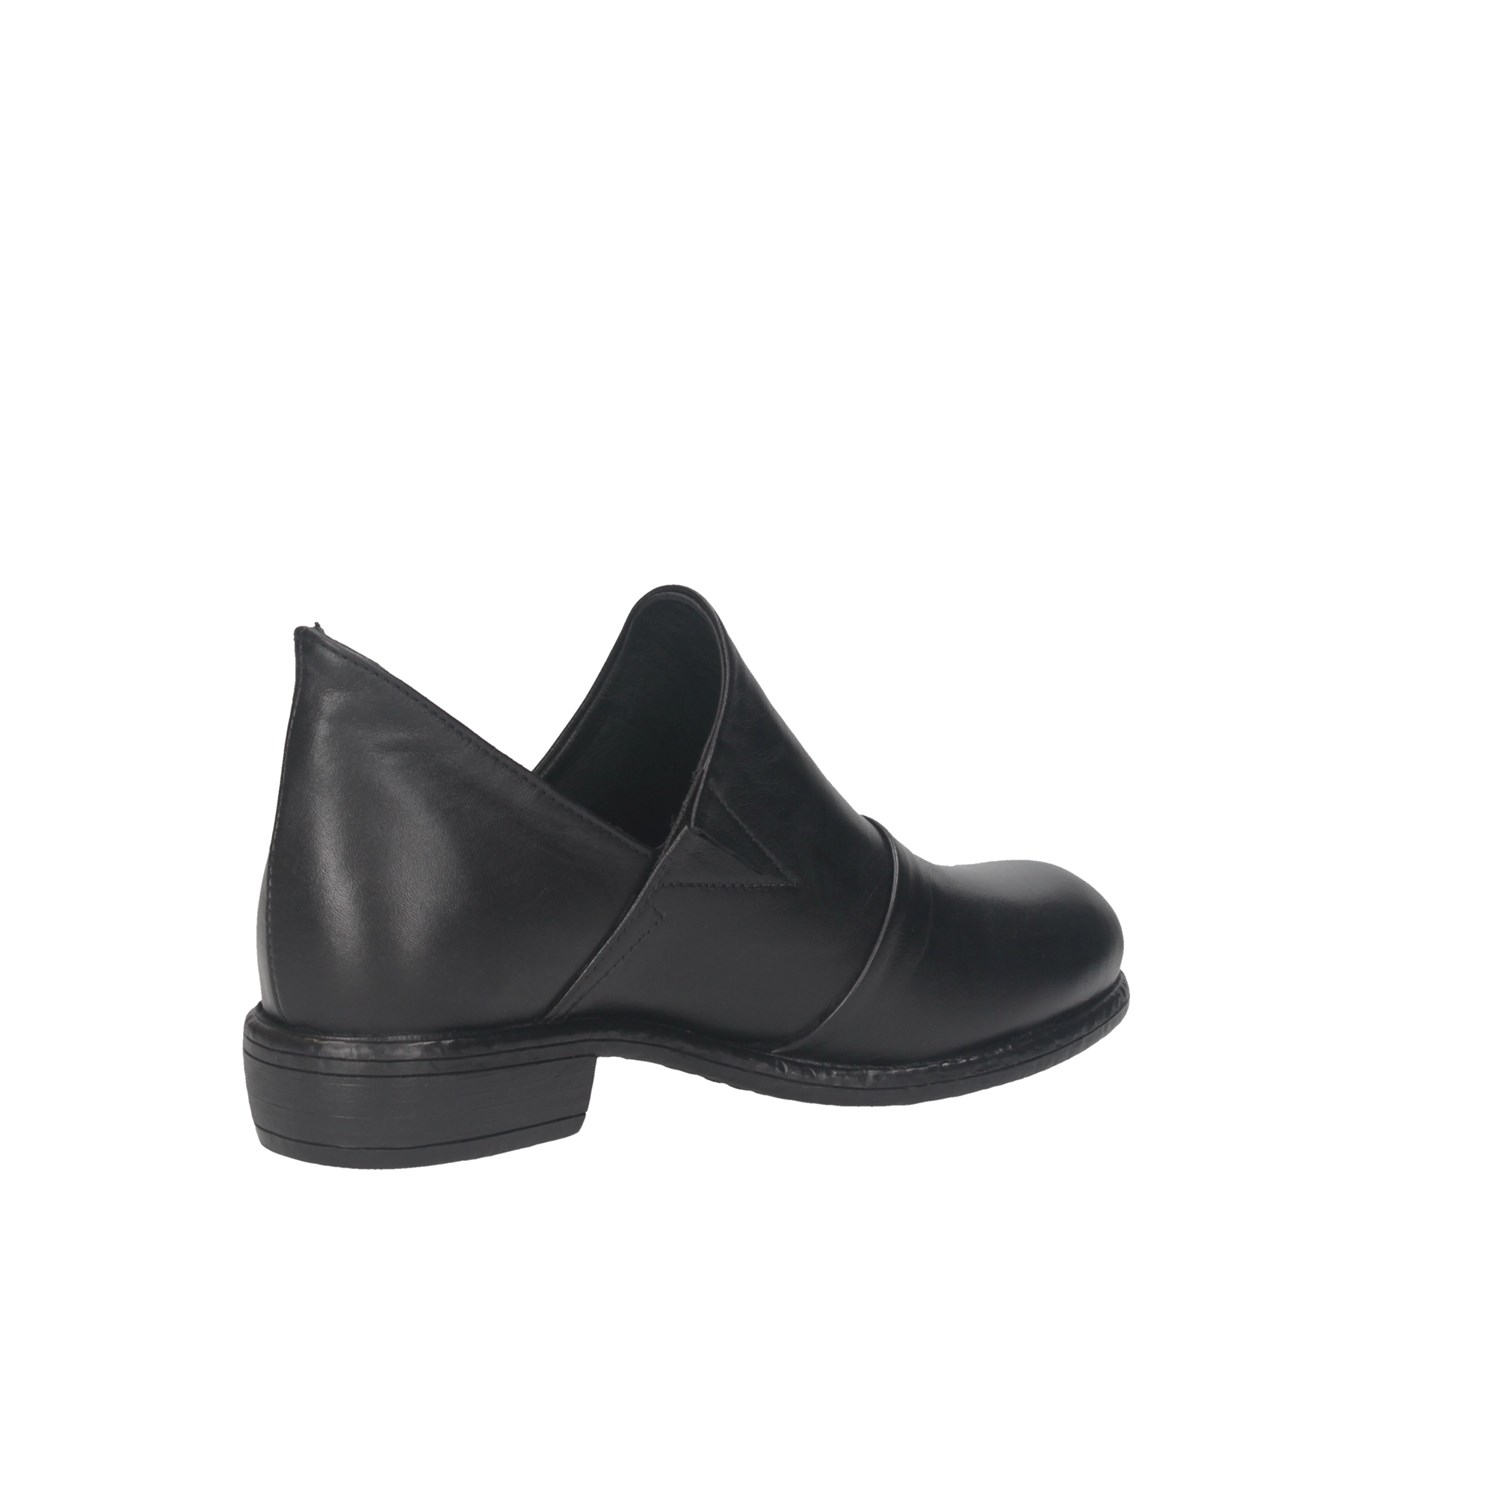 HERSUADE 3508 Black Shoes Woman 